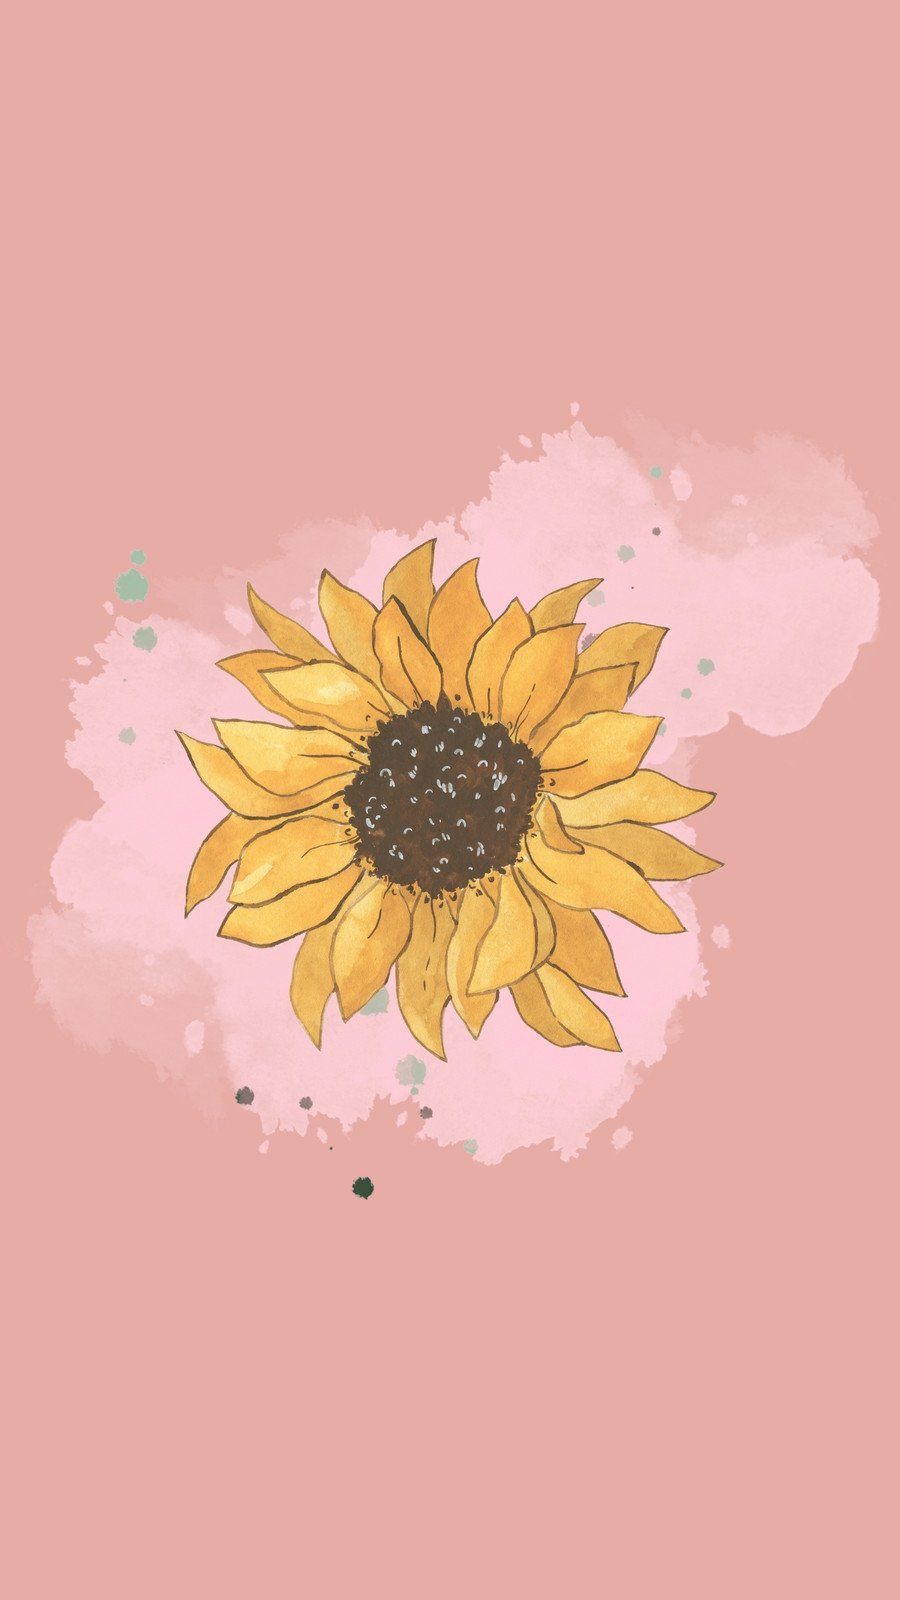 A sunflower on a pink background - Sunflower